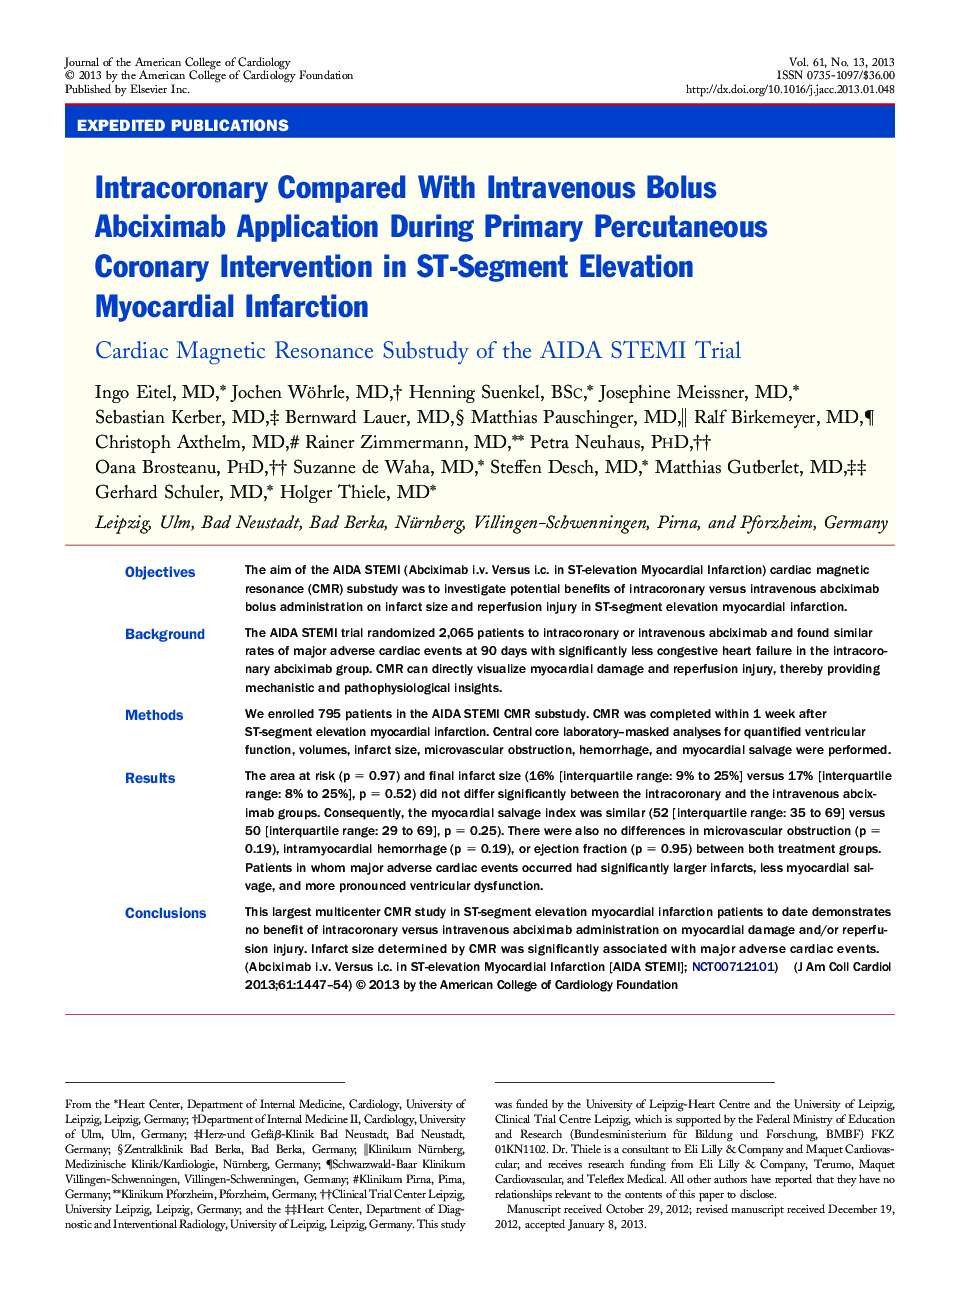 Intracoronary Compared With Intravenous Bolus Abciximab Application During Primary Percutaneous Coronary Intervention in ST-Segment Elevation Myocardial Infarction: Cardiac Magnetic Resonance Substudy of the AIDA STEMI Trial